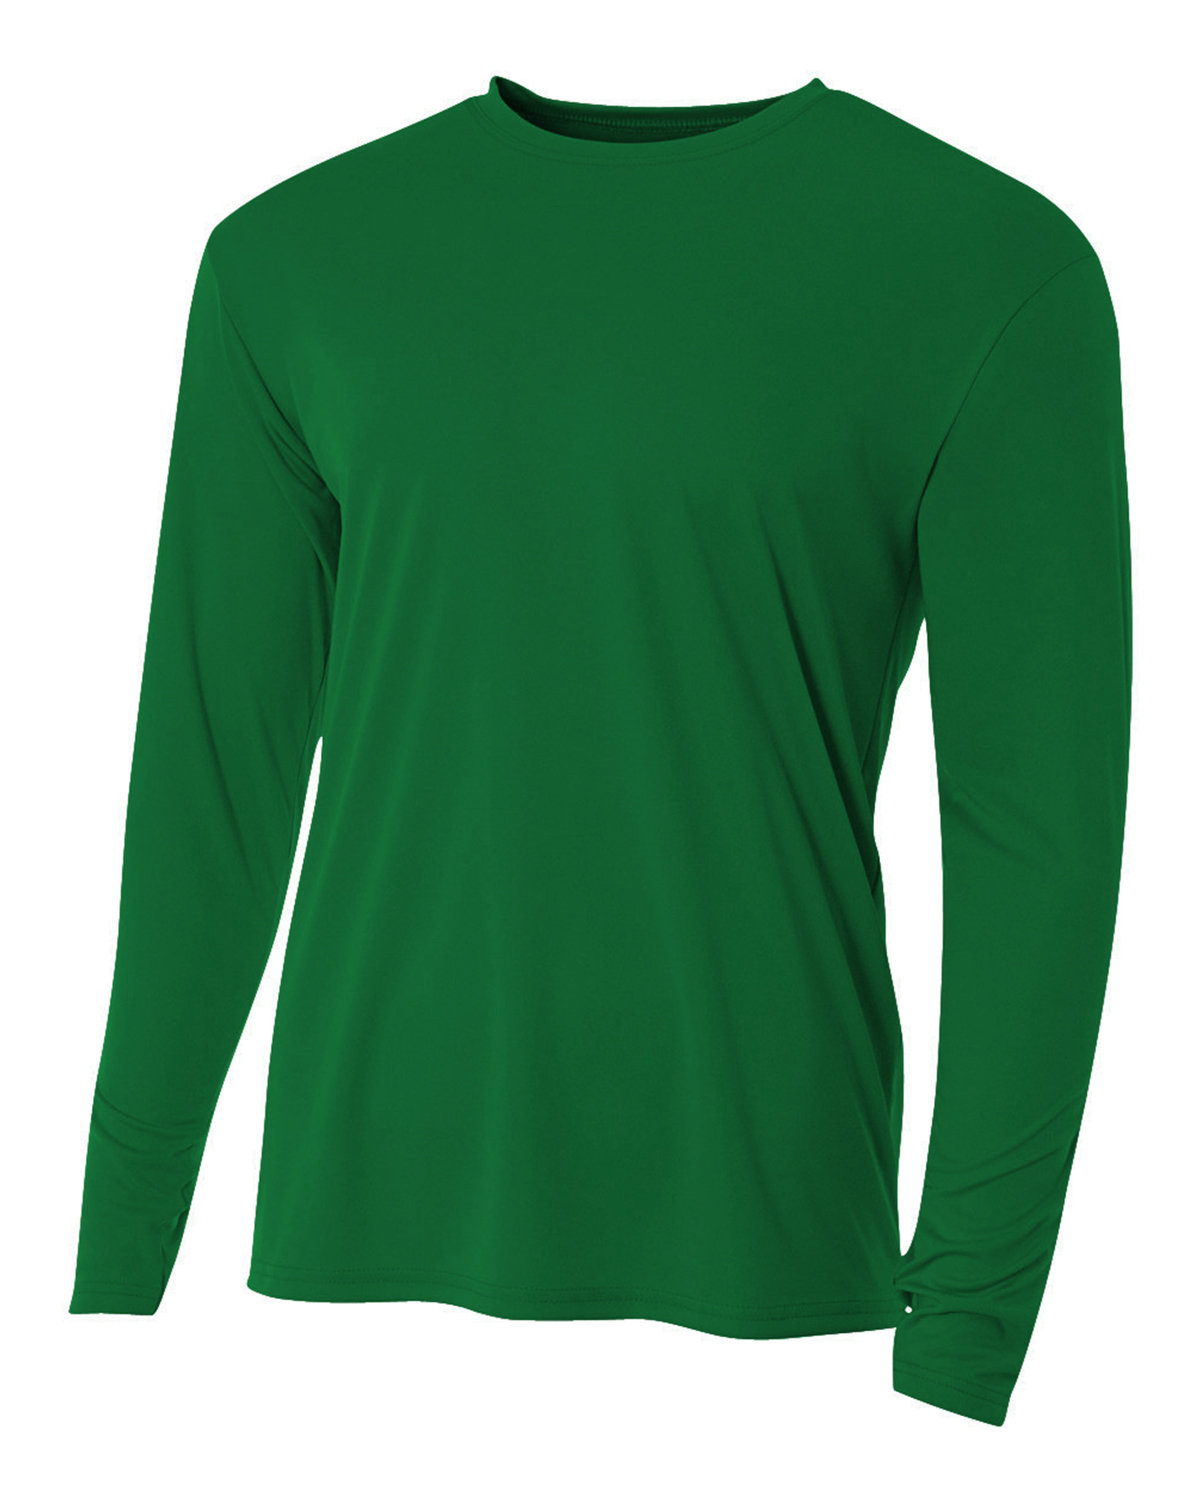 A4 Men's Cooling Performance Long Sleeve T-Shirt kelly 